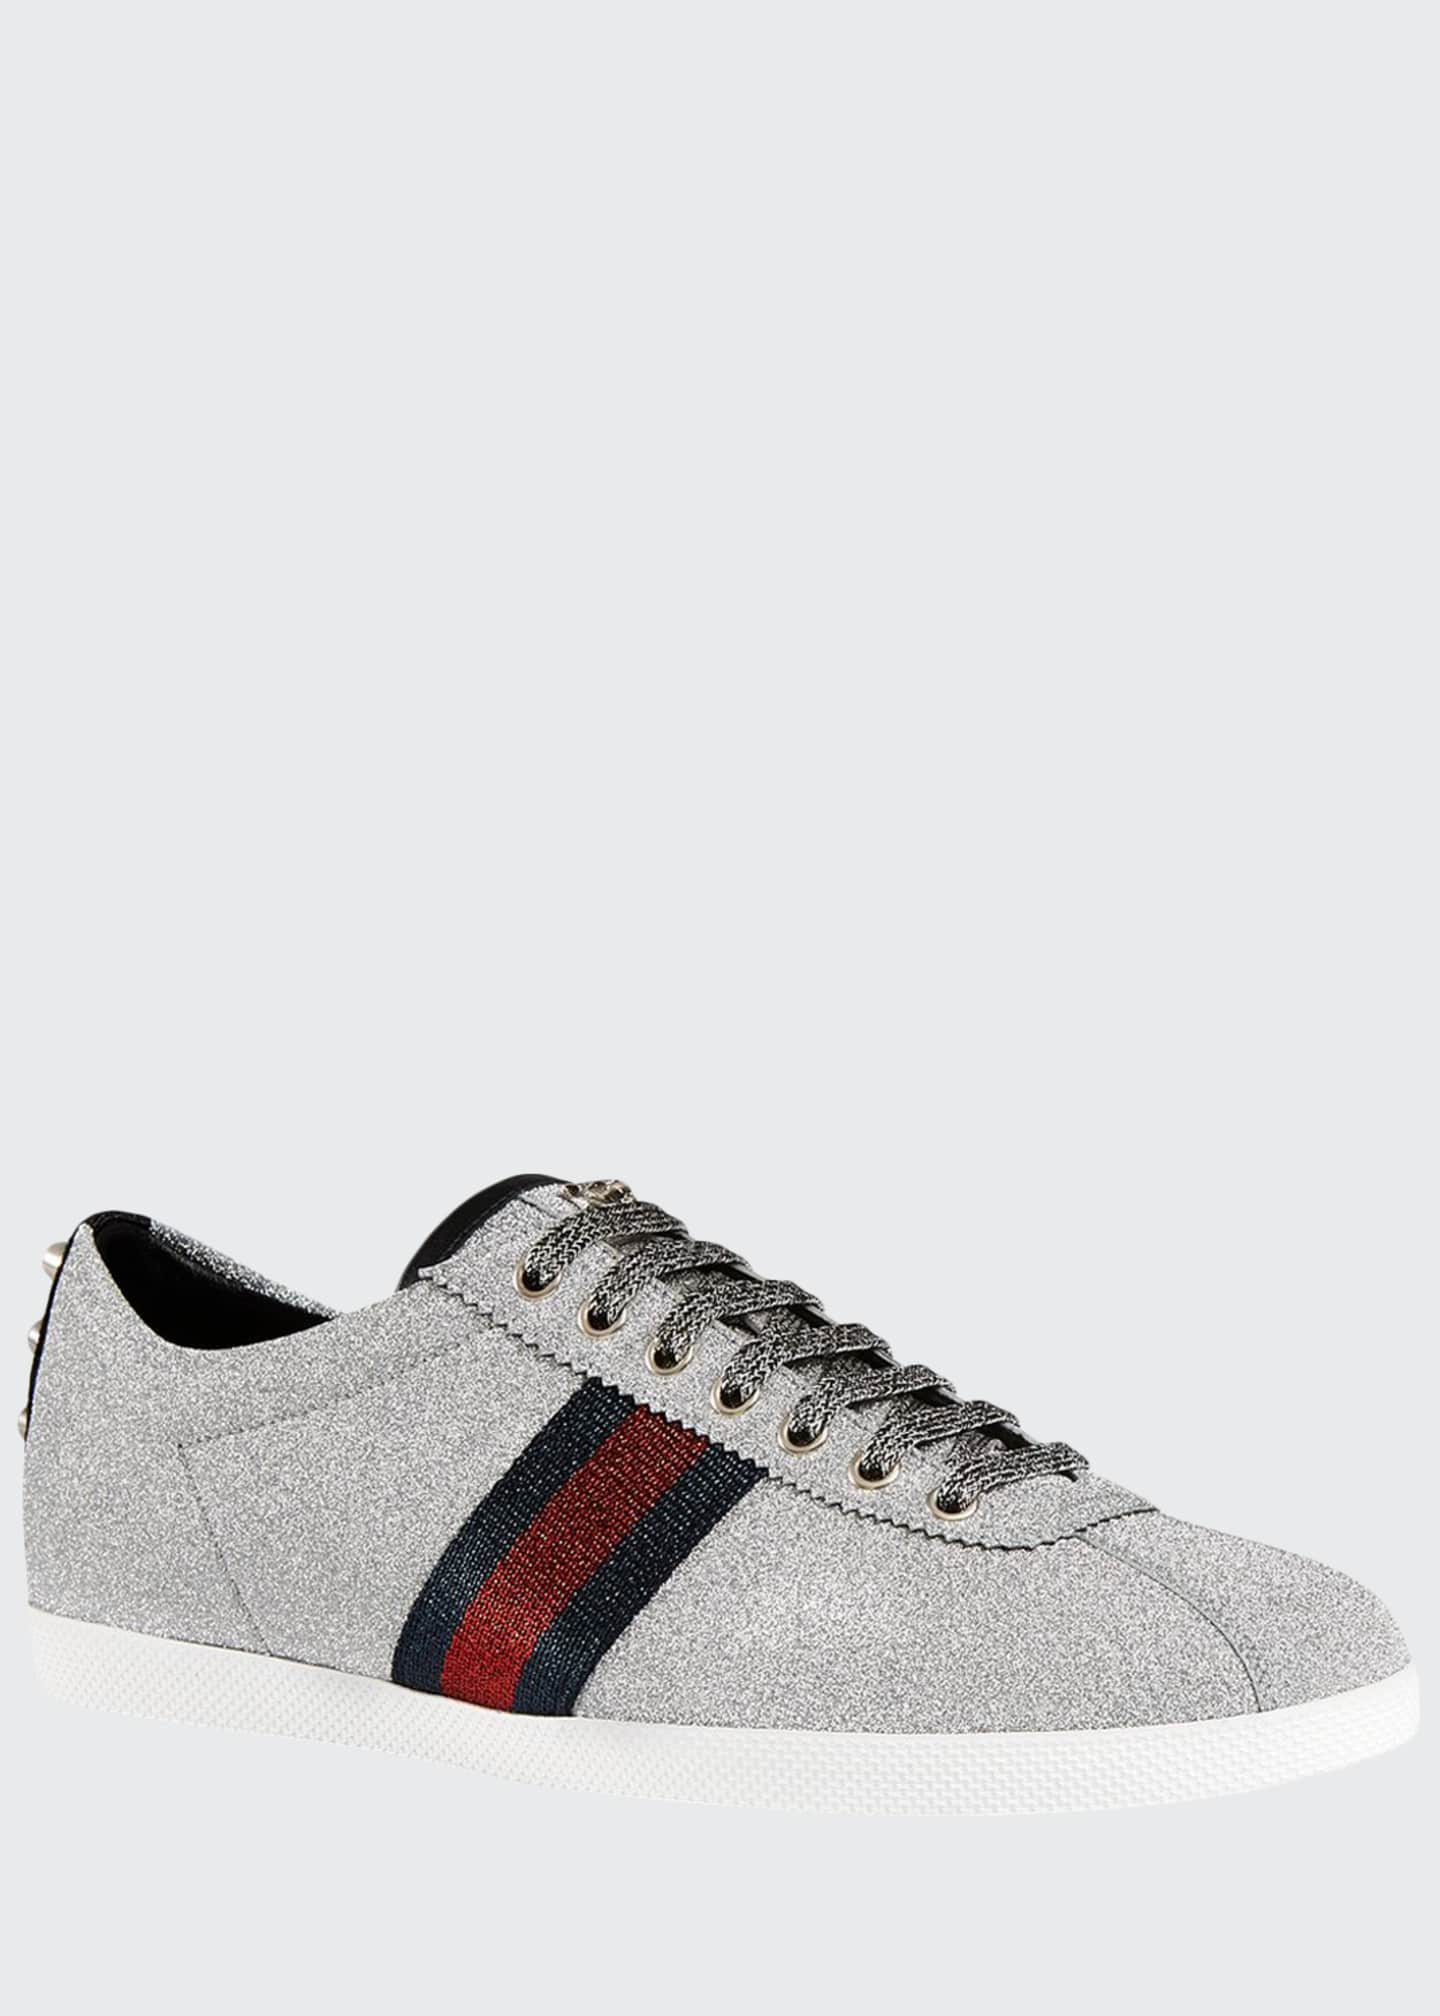 grey gucci sneakers